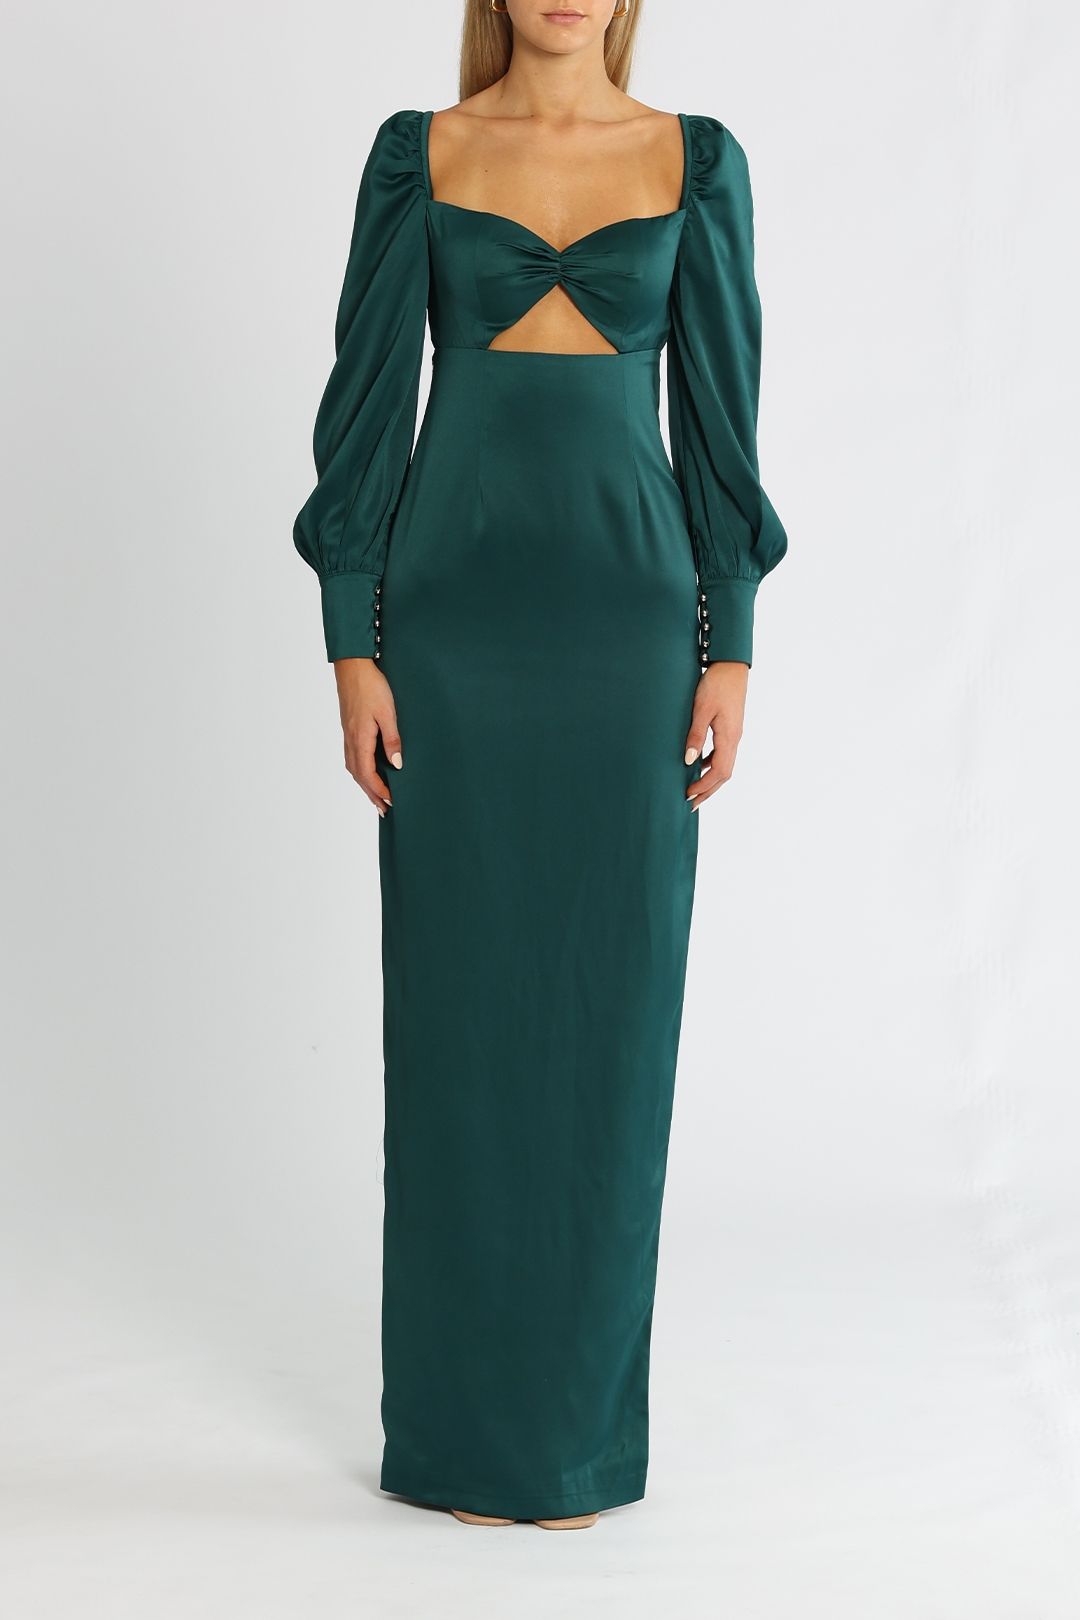 Hire Sweetheart Style Maxi Dress in Forest Green | Elle Zeitoune ...